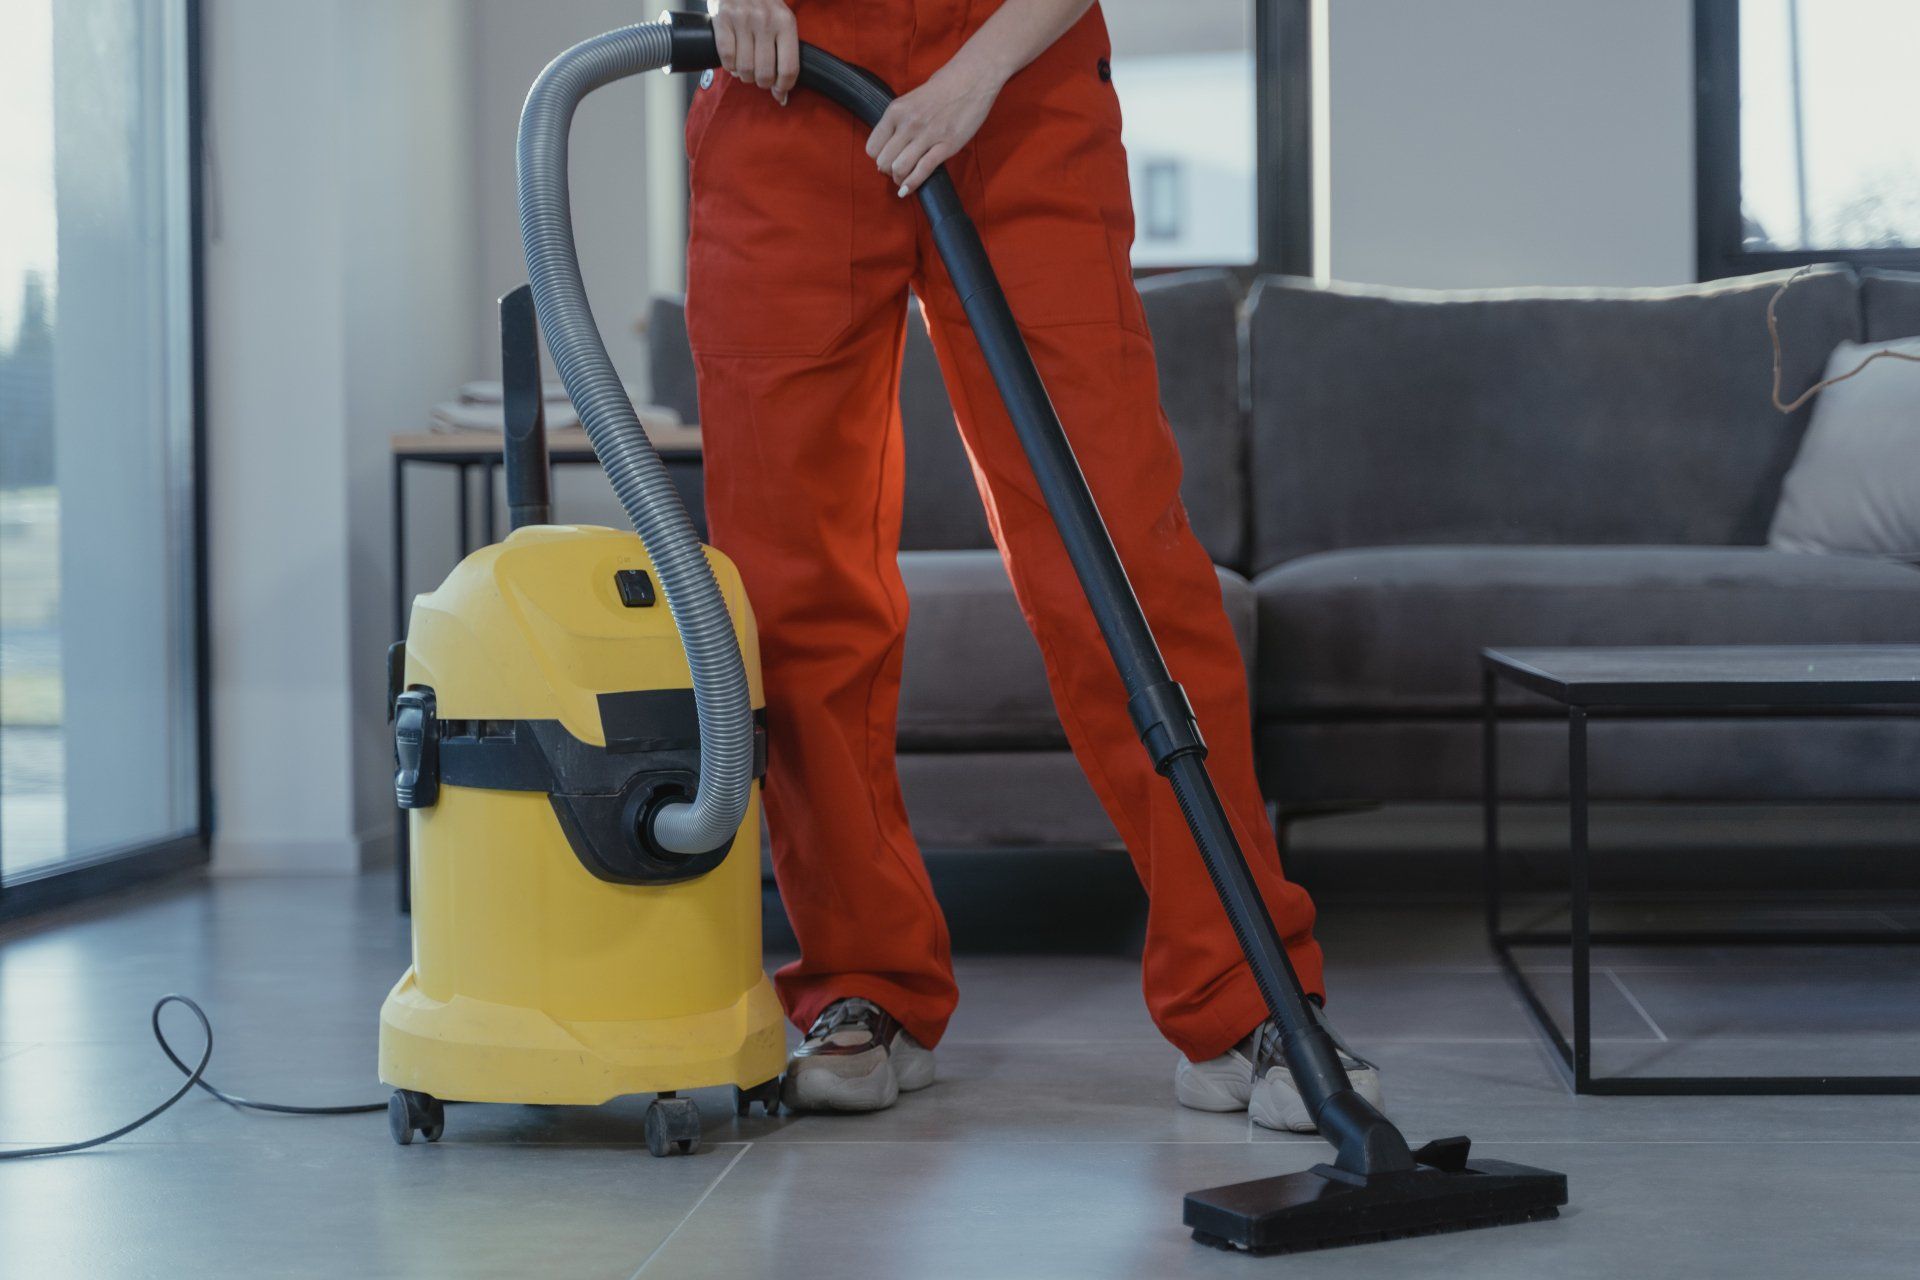 A person is using a vacuum cleaner in a living room.